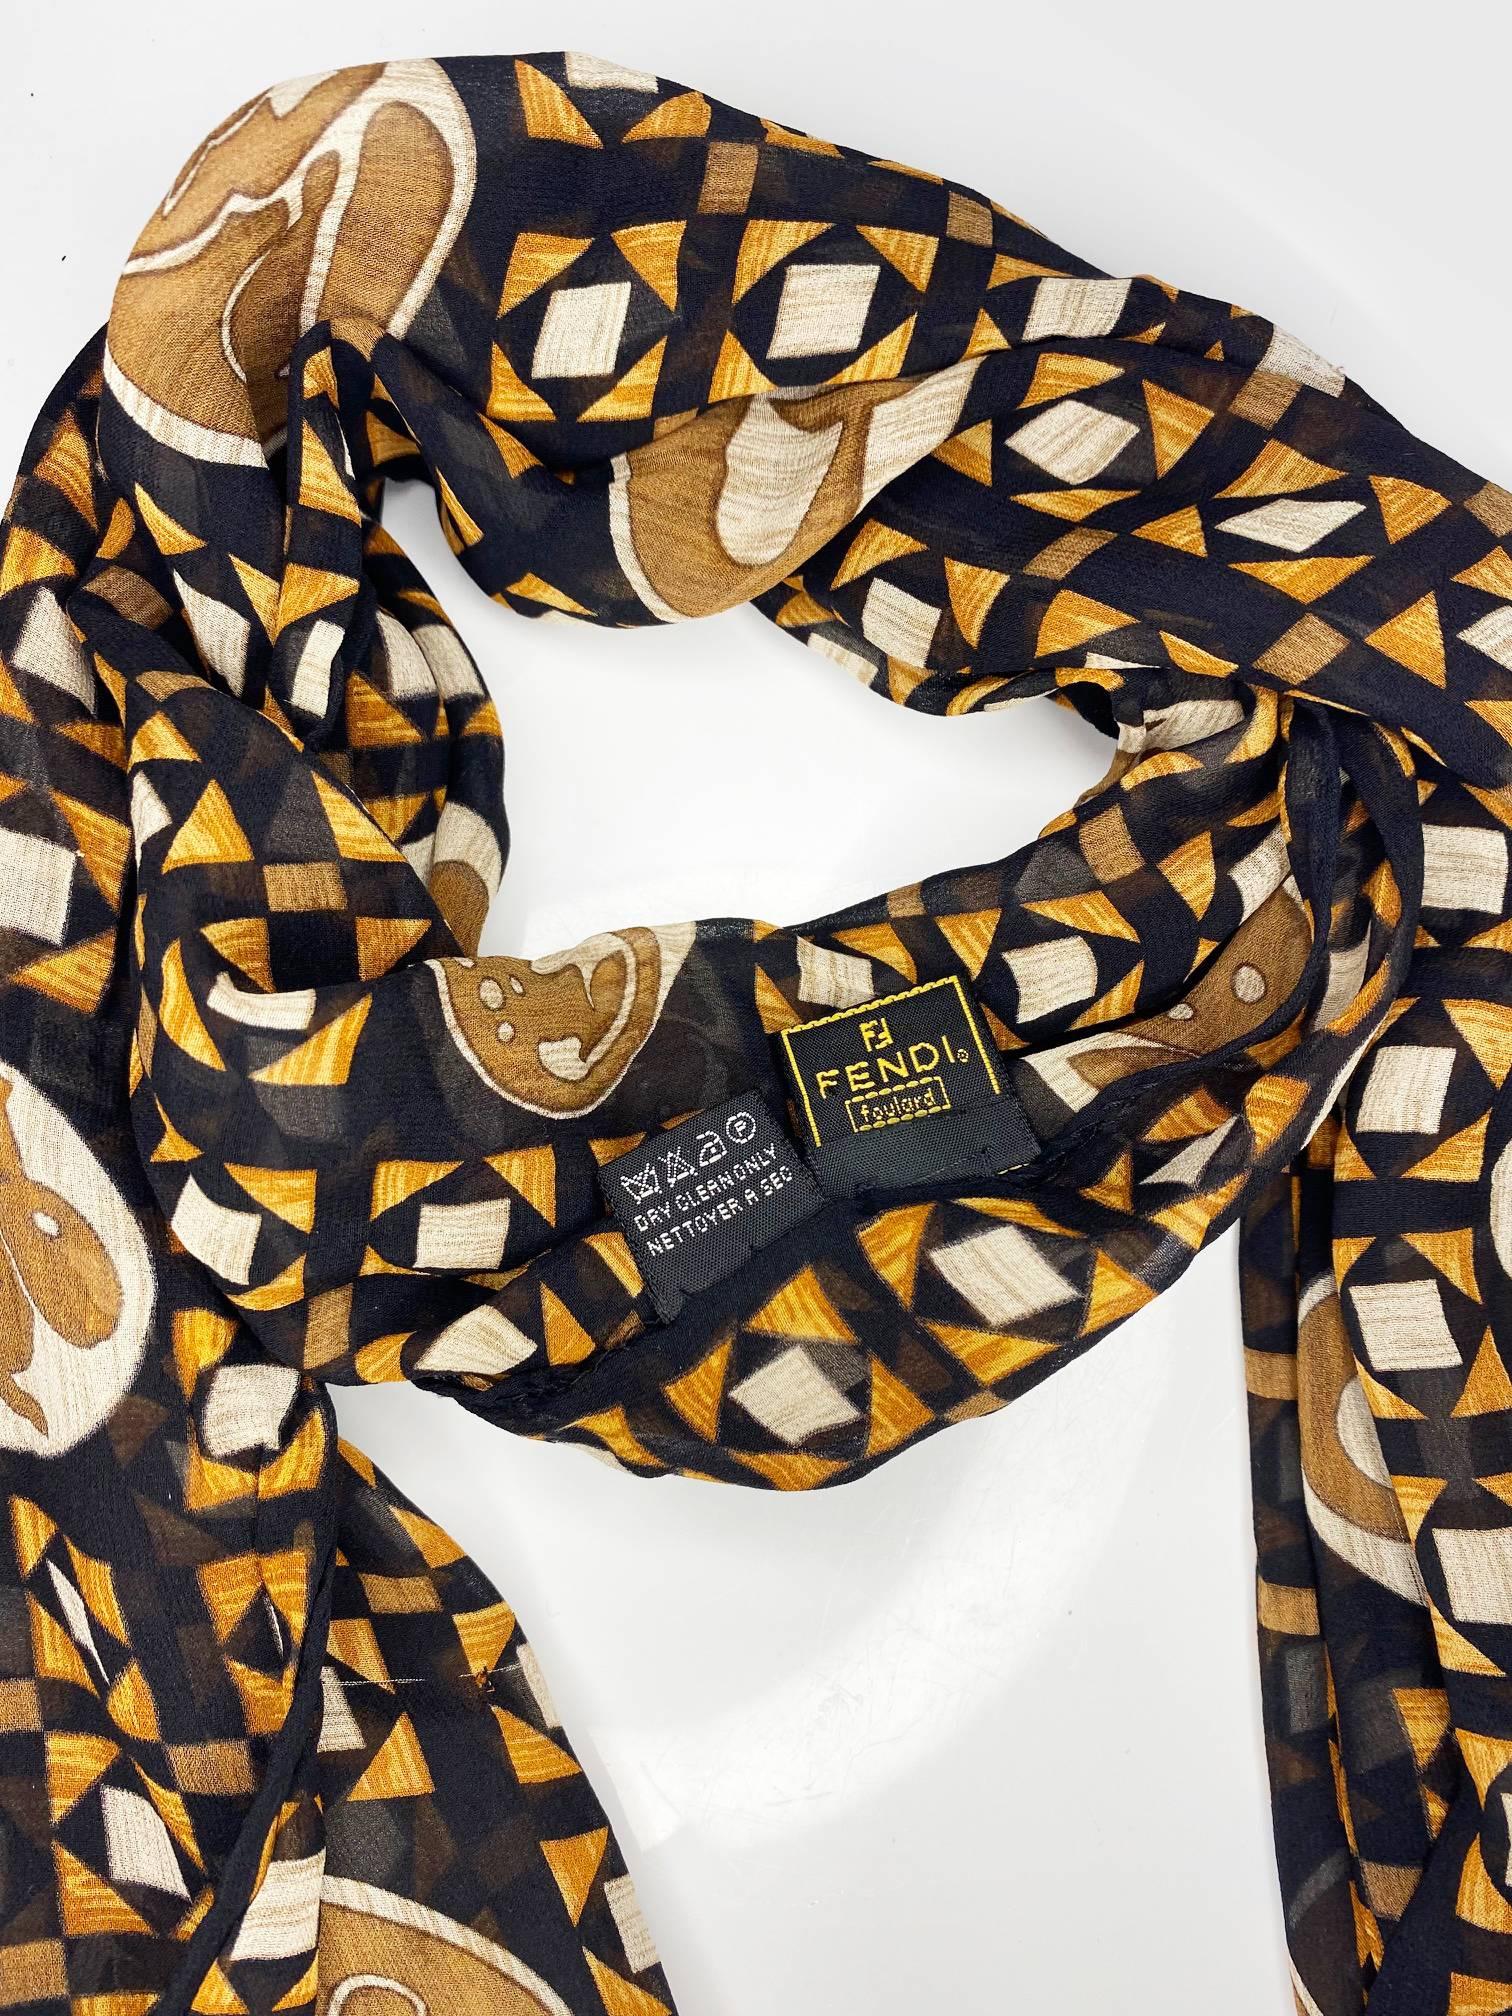 This stylish FENDI chiffon scarf features a unique blend of the iconic 